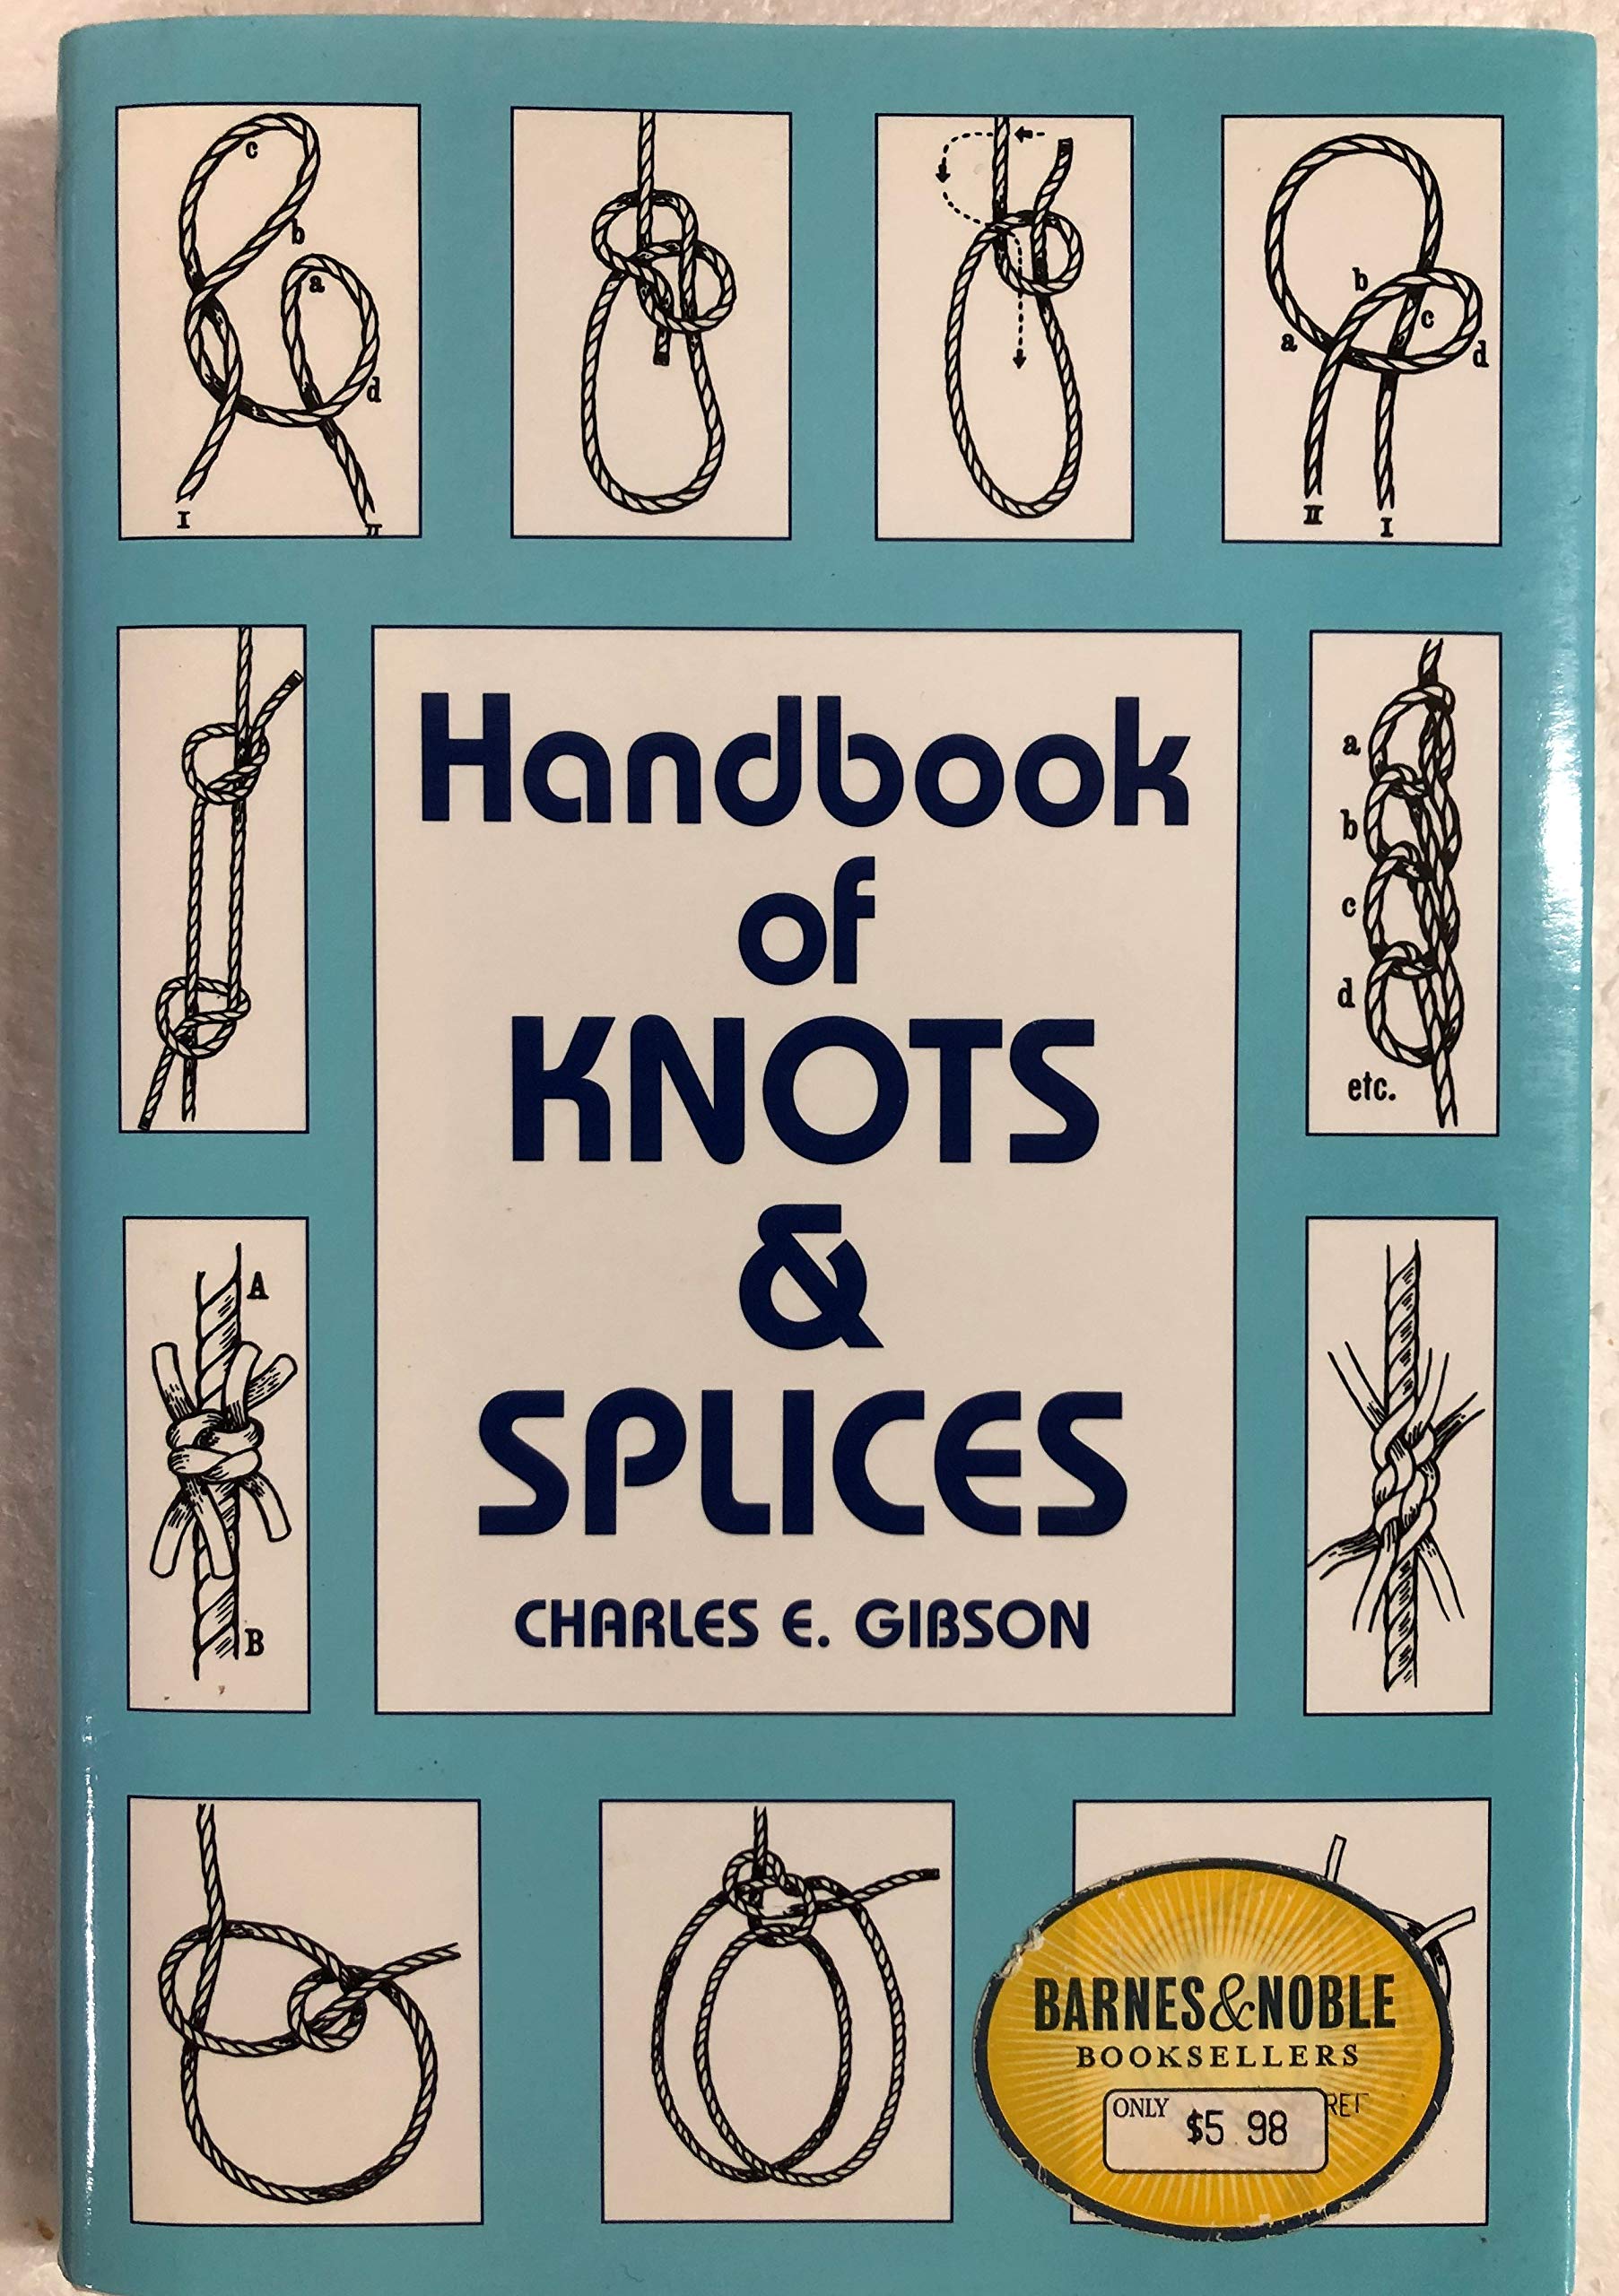 Knots & Splices by Cyrus Lawrence Day  in pdf